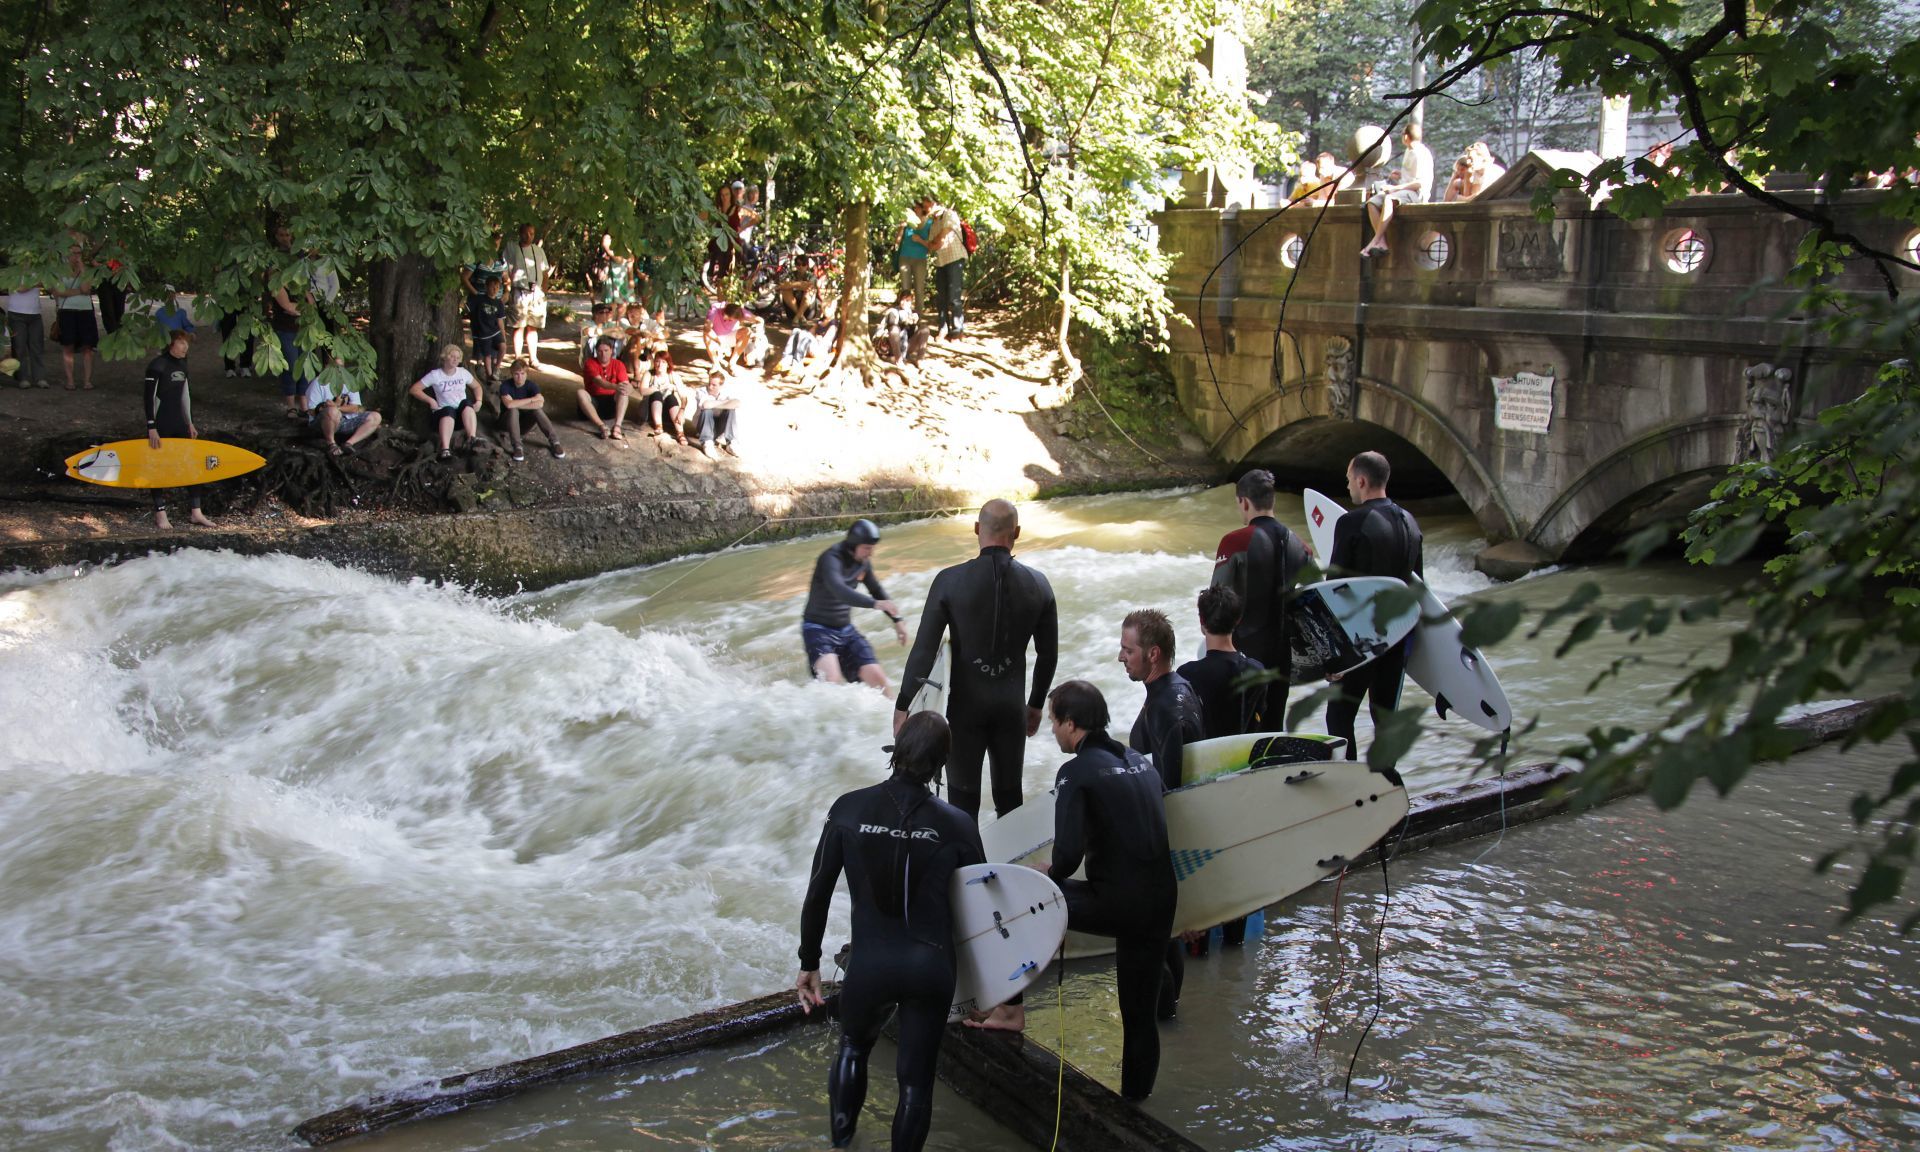 The perfect wave – surfing in the middle of Munich!